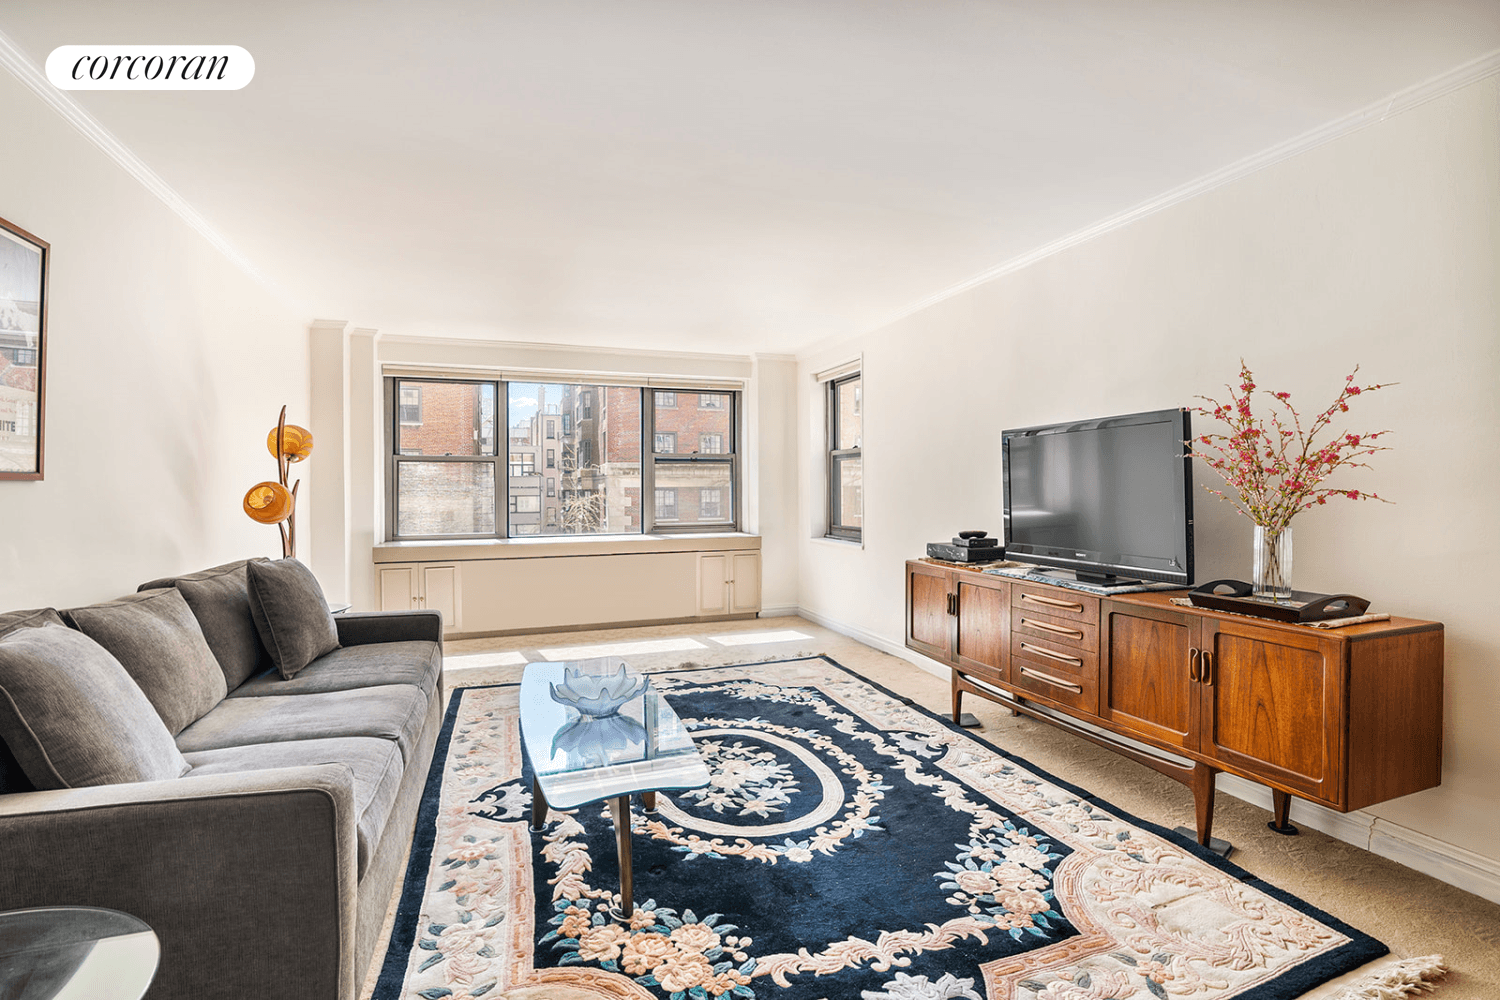 A rarely available spacious five room home in a full service Upper East Side co op near Carl Schurz Park is now on the market.